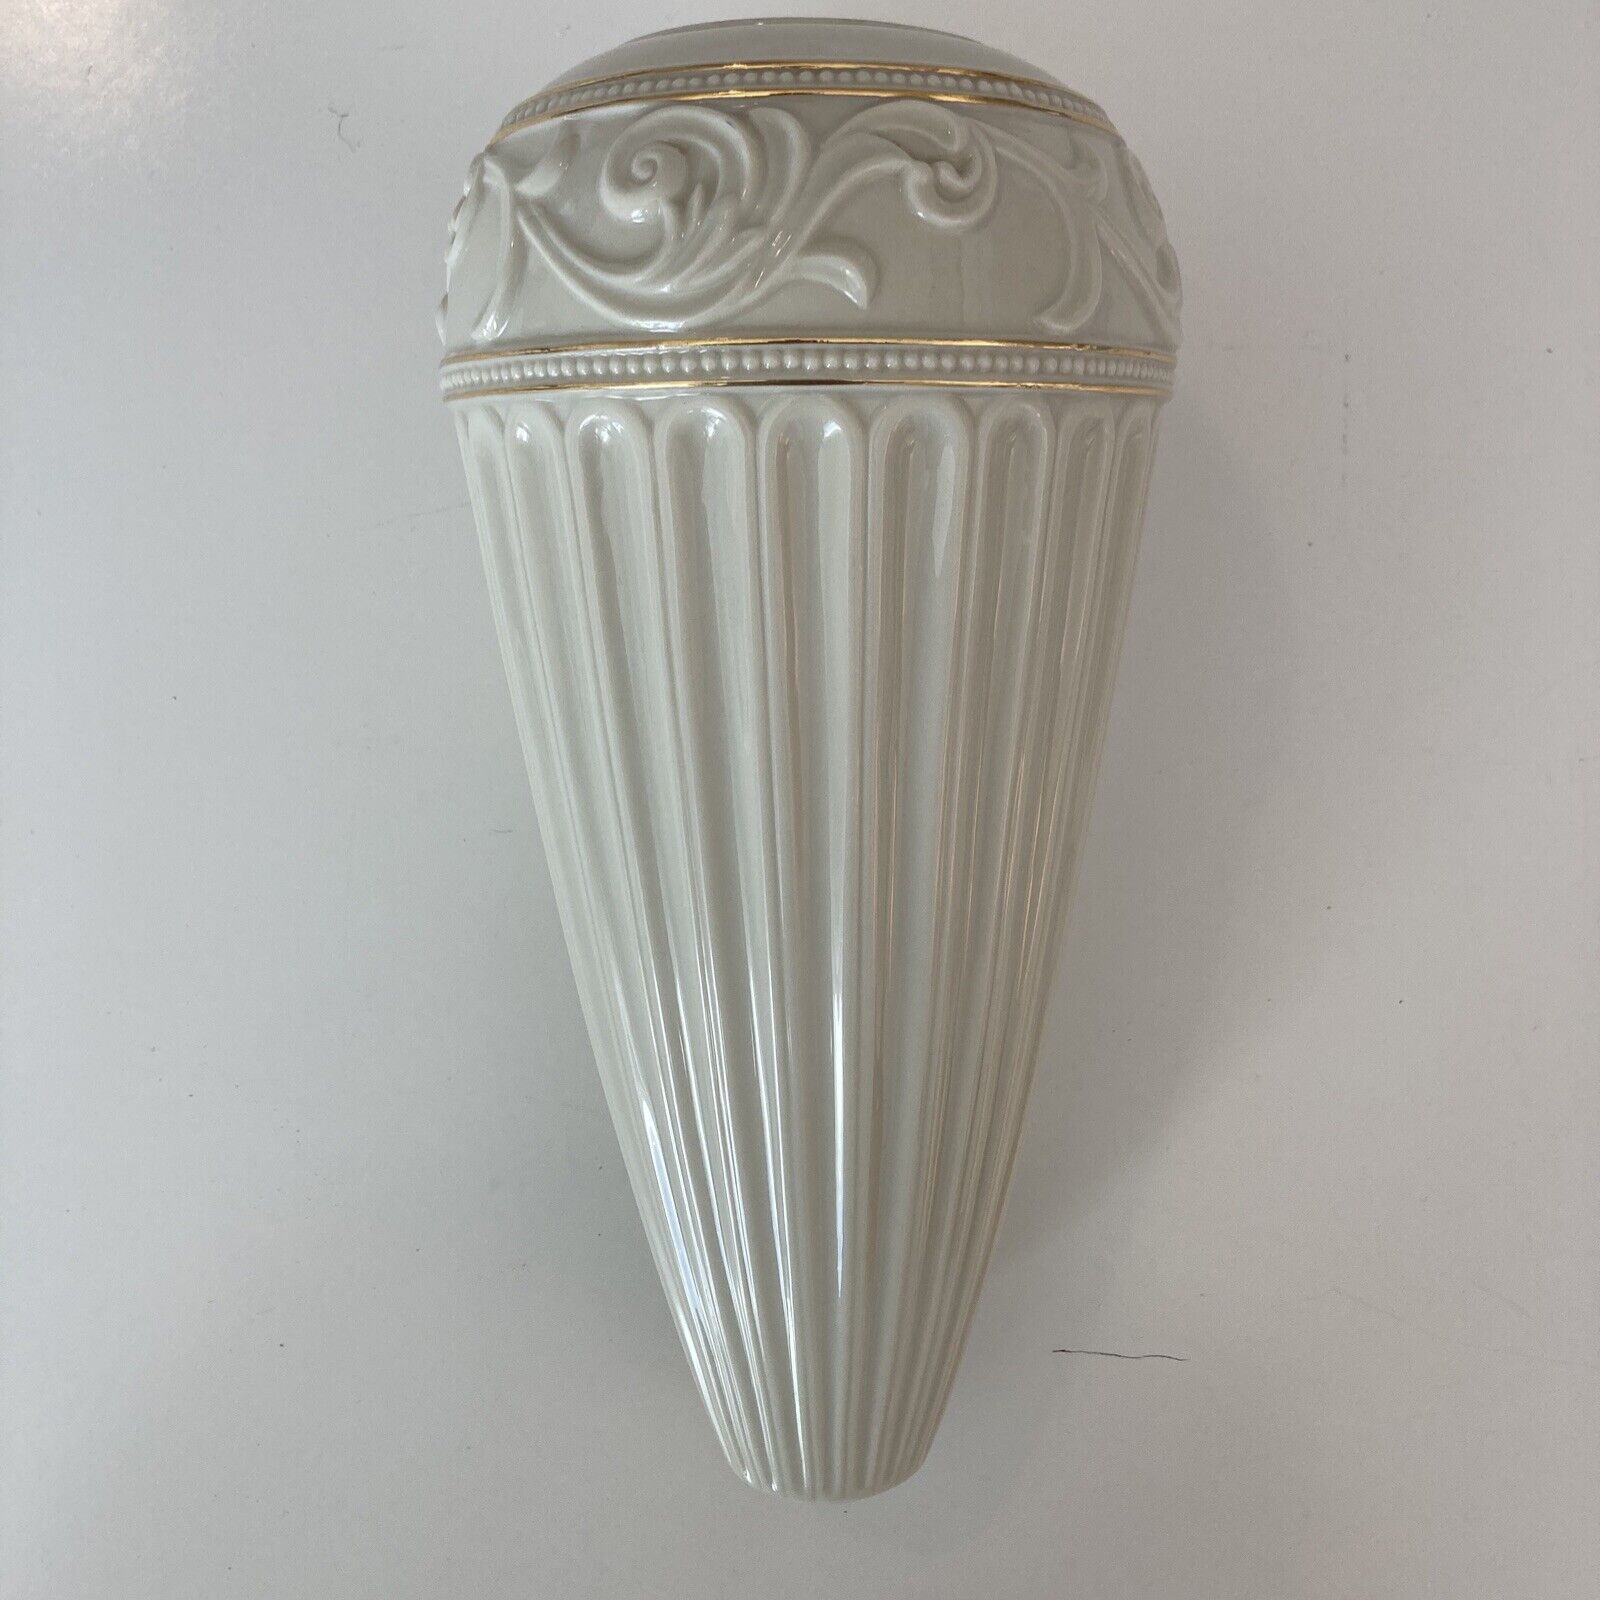 Lenox Lamp Porcelain Base for display or project